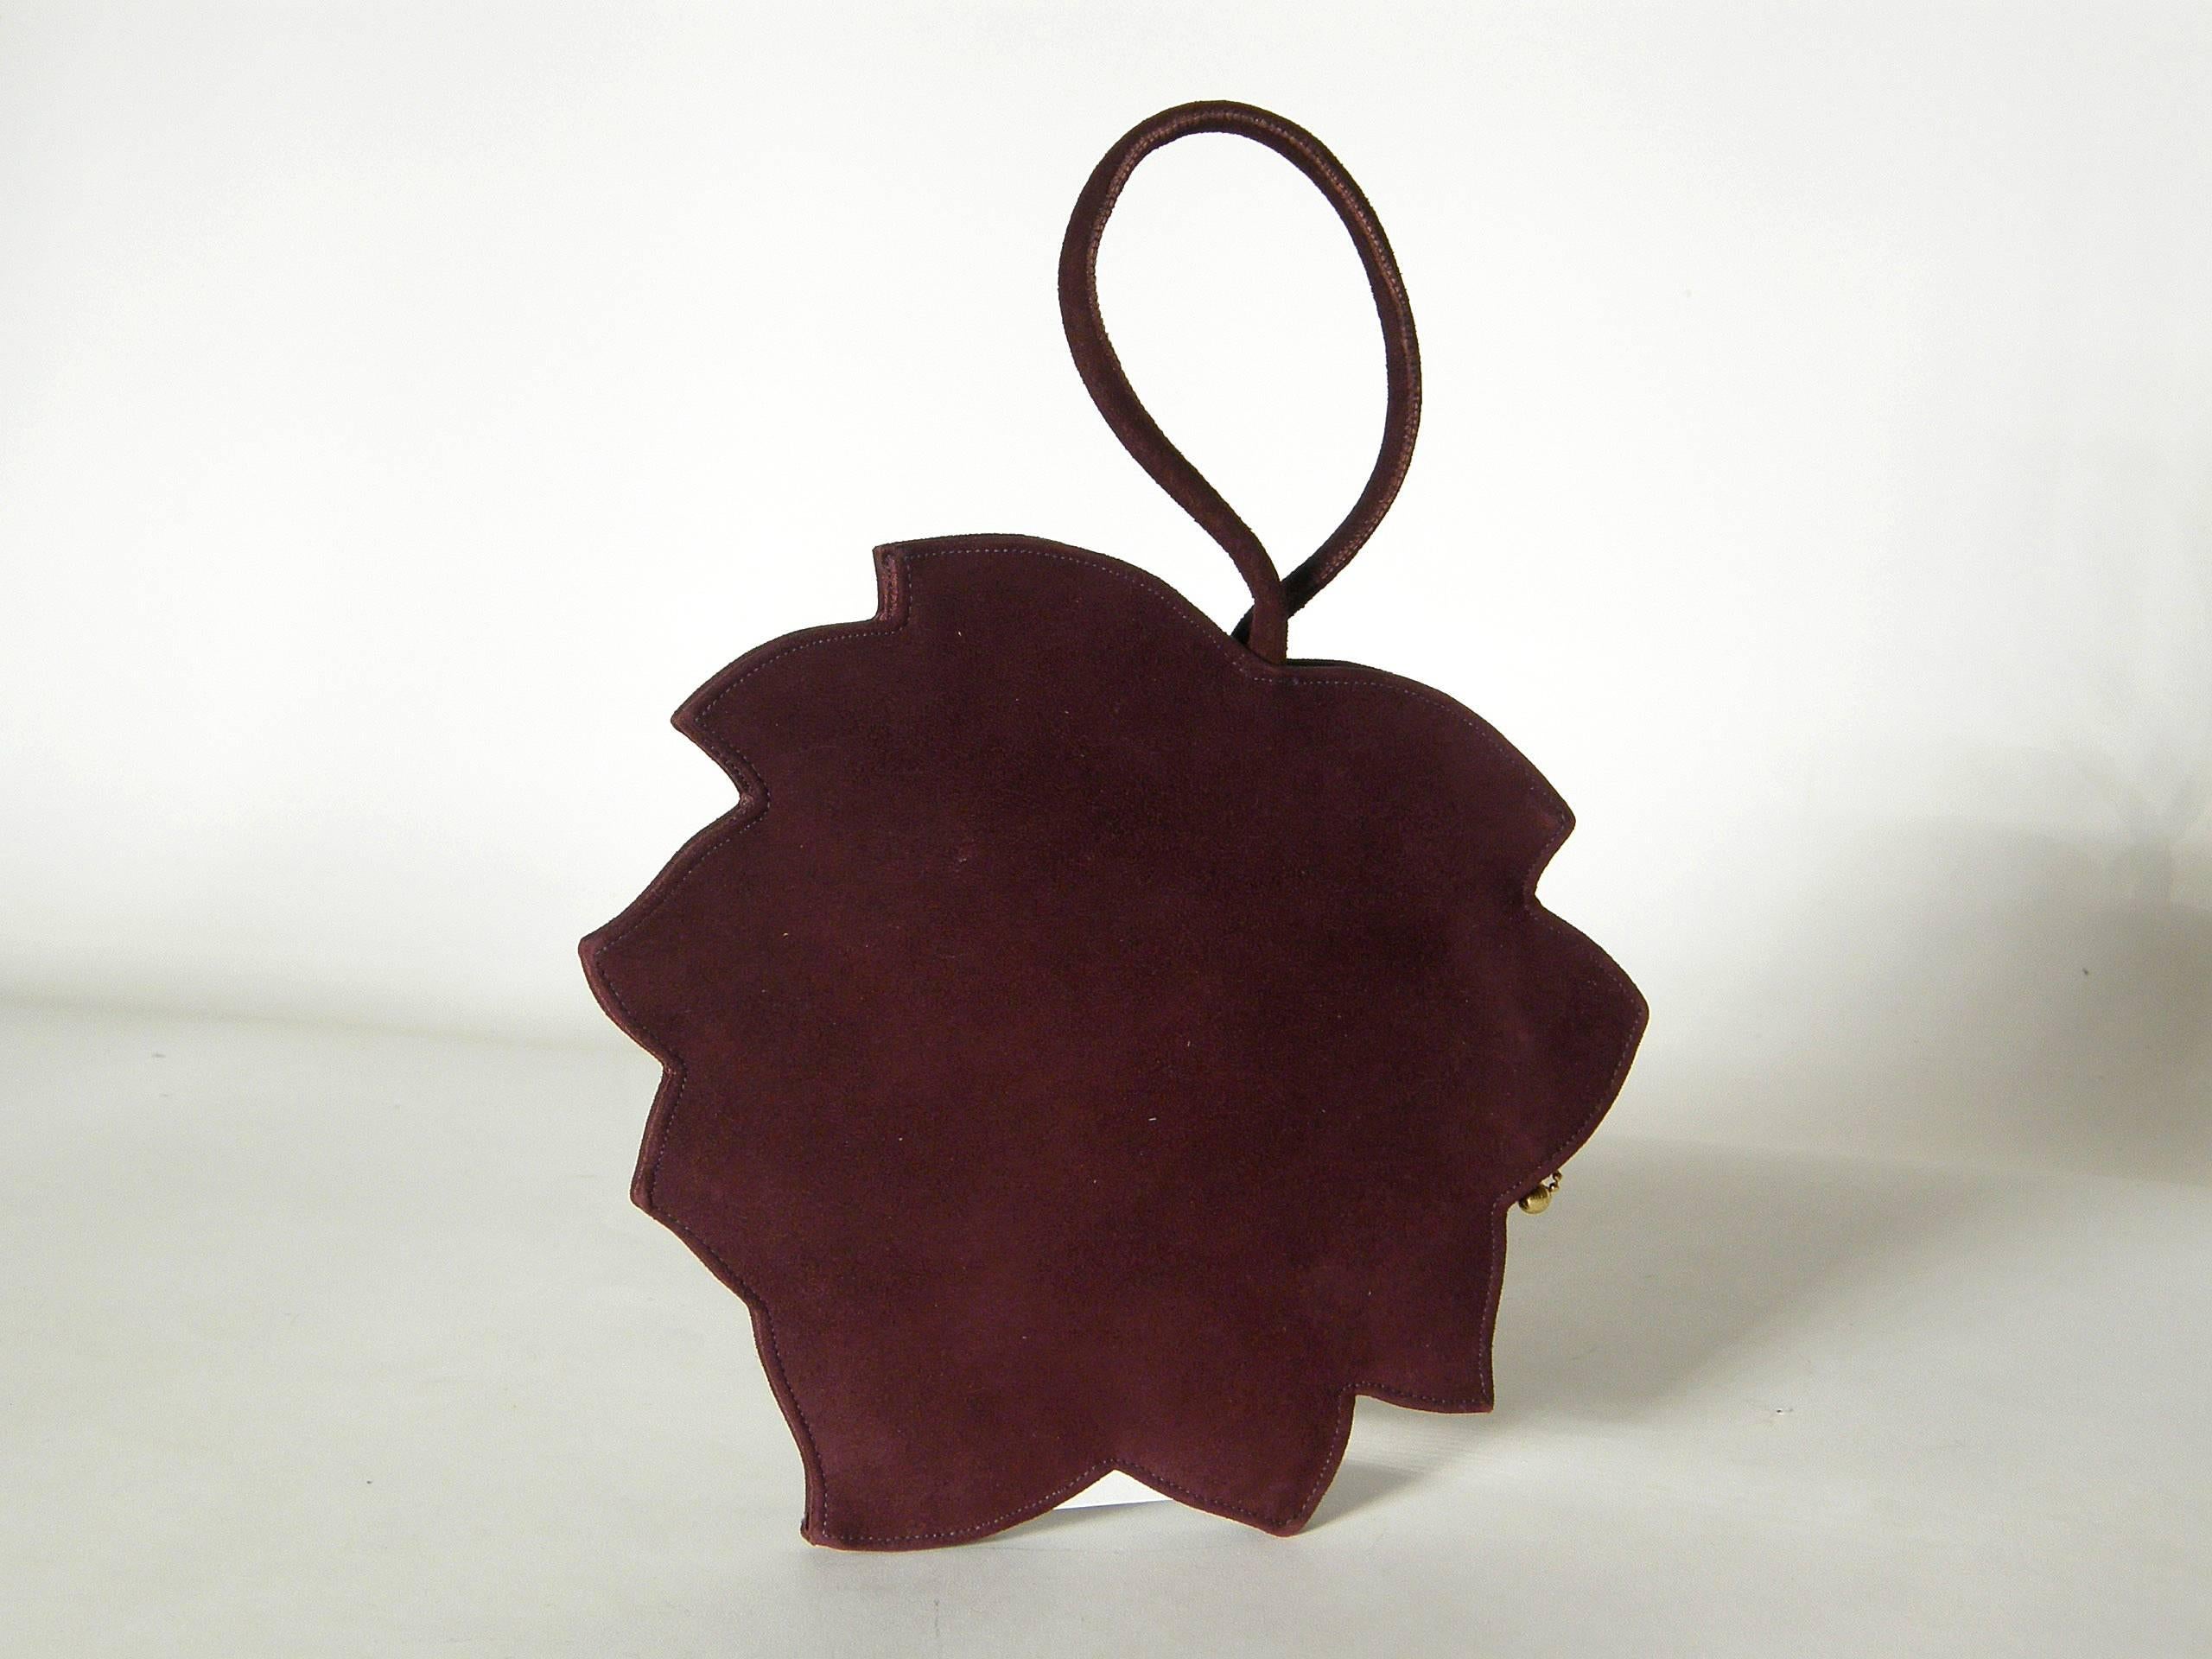 This marvelous, figural handbag shaped like a realistic leaf is made of a gorgeous, aubergine colored suede with raised, stitched 